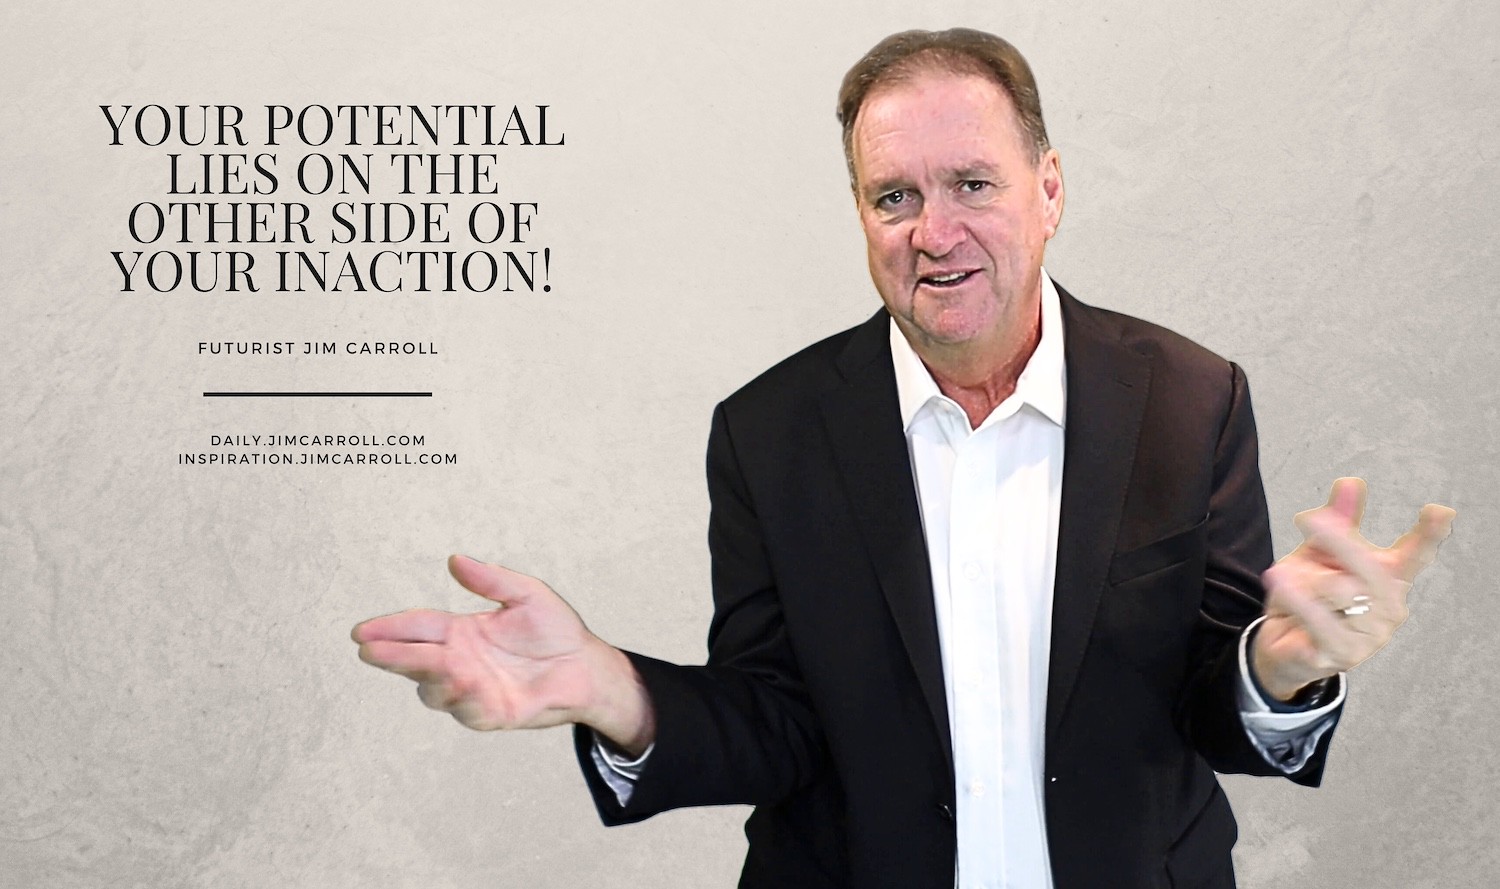 "Your potential lies on the other side of your inaction!" - Futurist Jim Carroll